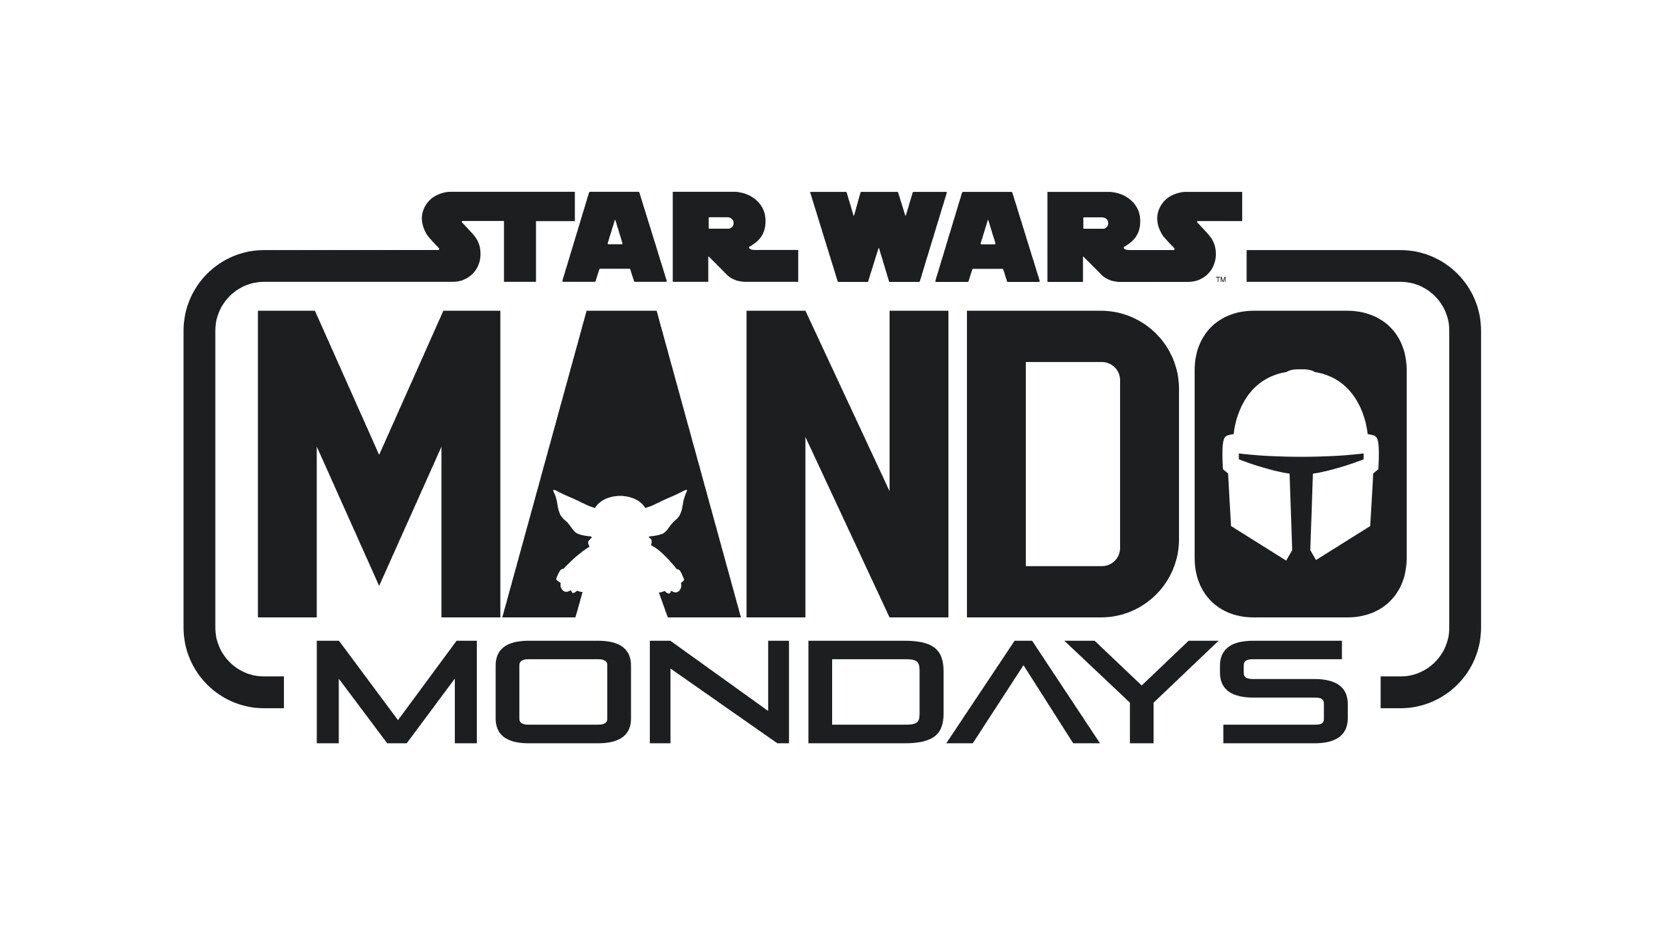 Disney and Lucasfilm announce “Mando Mondays” – A new global product reveal program in celebration of “The Mandalorian”